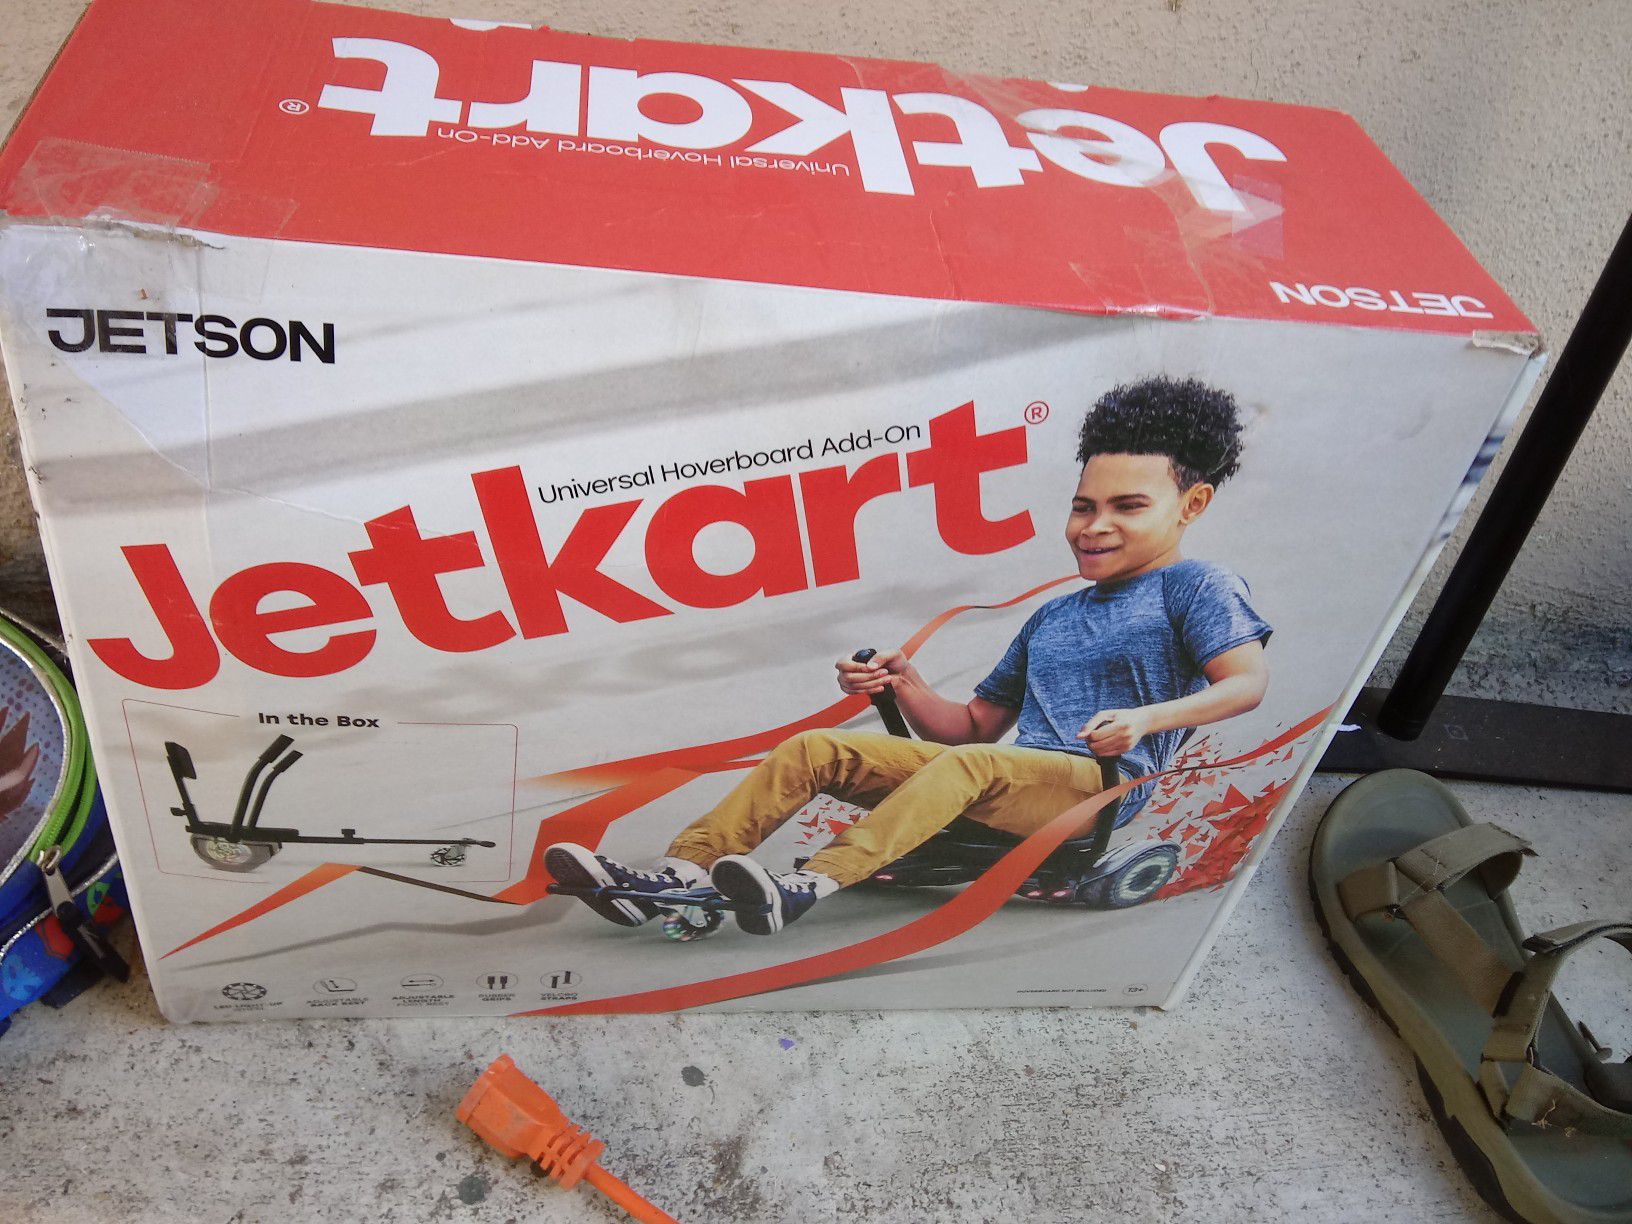 Jetson jetkart hoverboard ATTACHMENT only